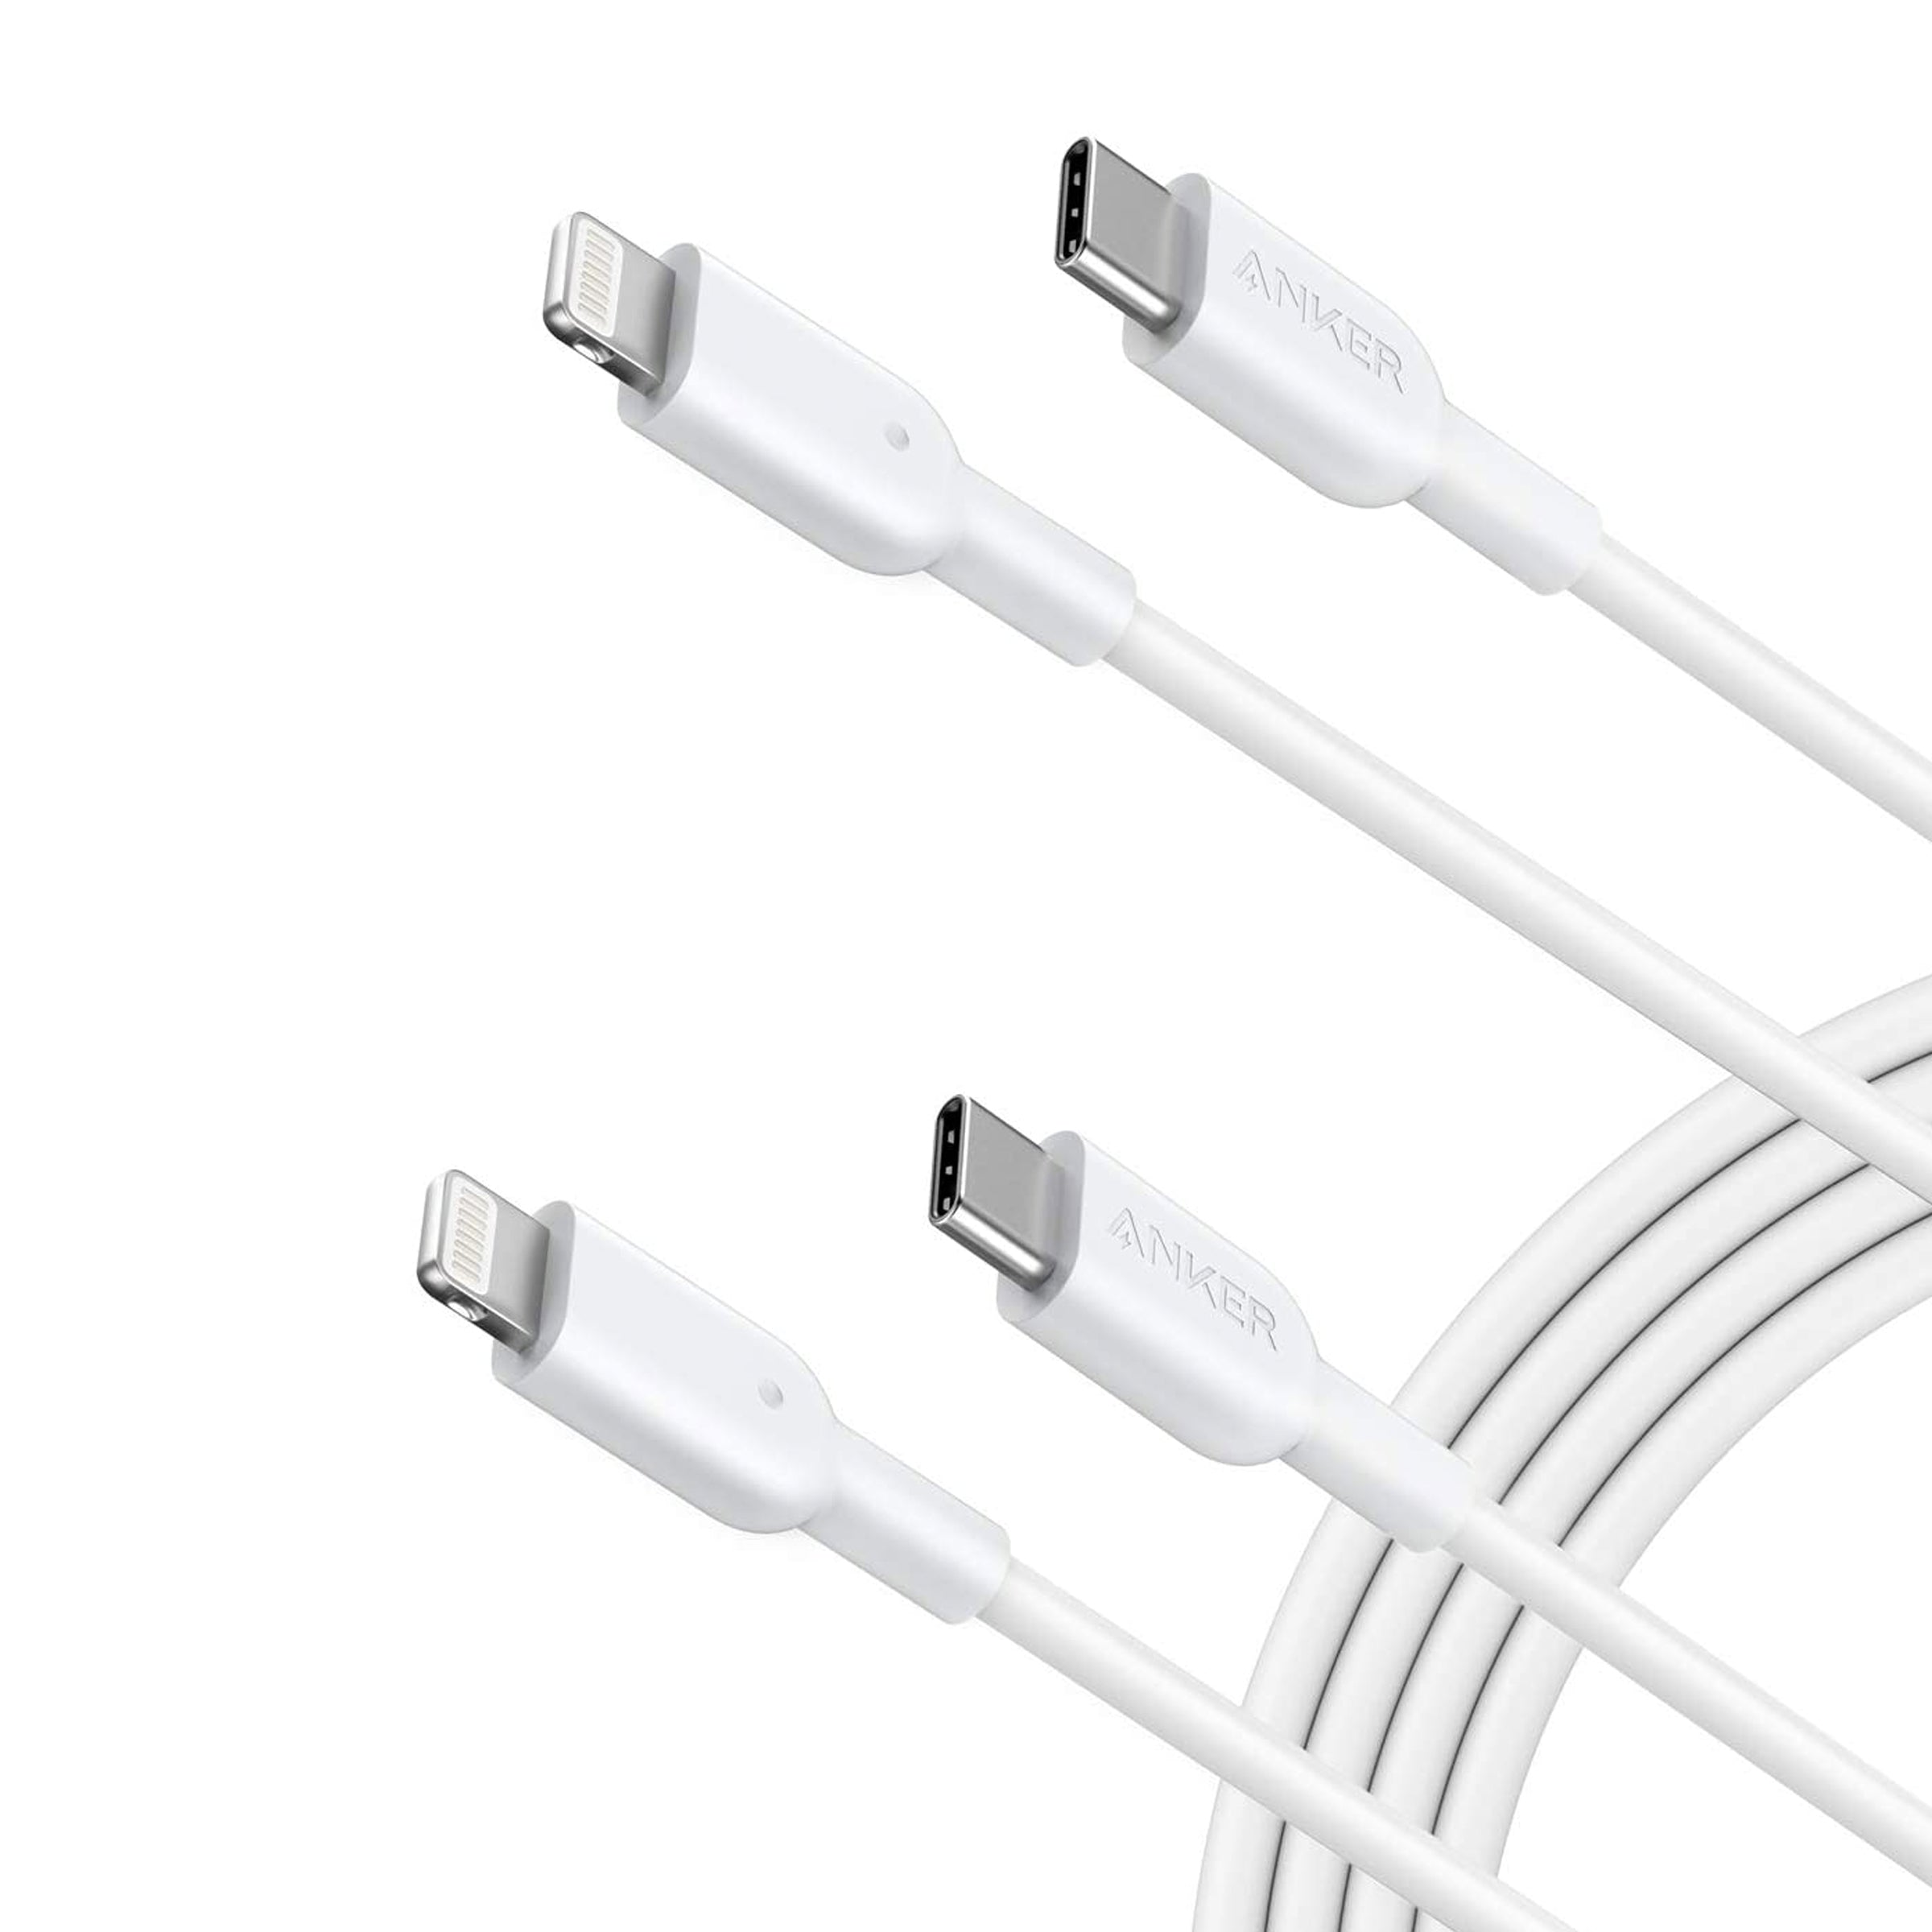 Anker <b>321</b> USB-C to Lightning Cable (6 ft, 2-Pack)